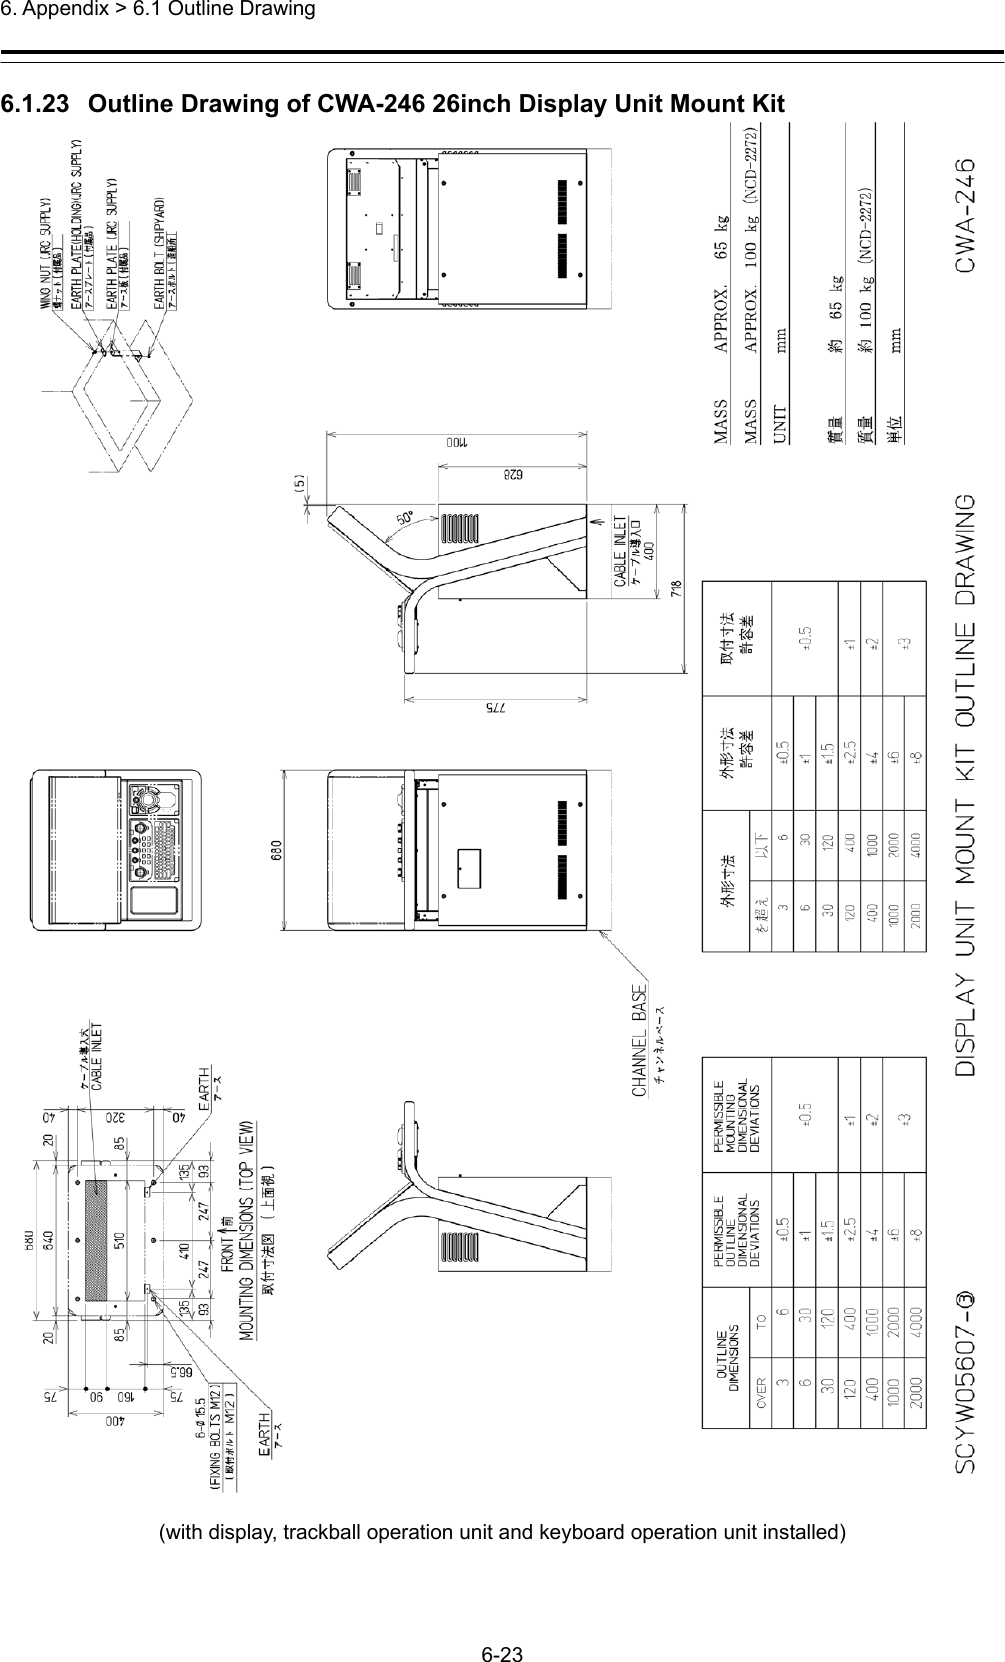  6. Appendix &gt; 6.1 Outline Drawing 6-23  6.1.23   Outline Drawing of CWA-246 26inch Display Unit Mount Kit   (with display, trackball operation unit and keyboard operation unit installed) 